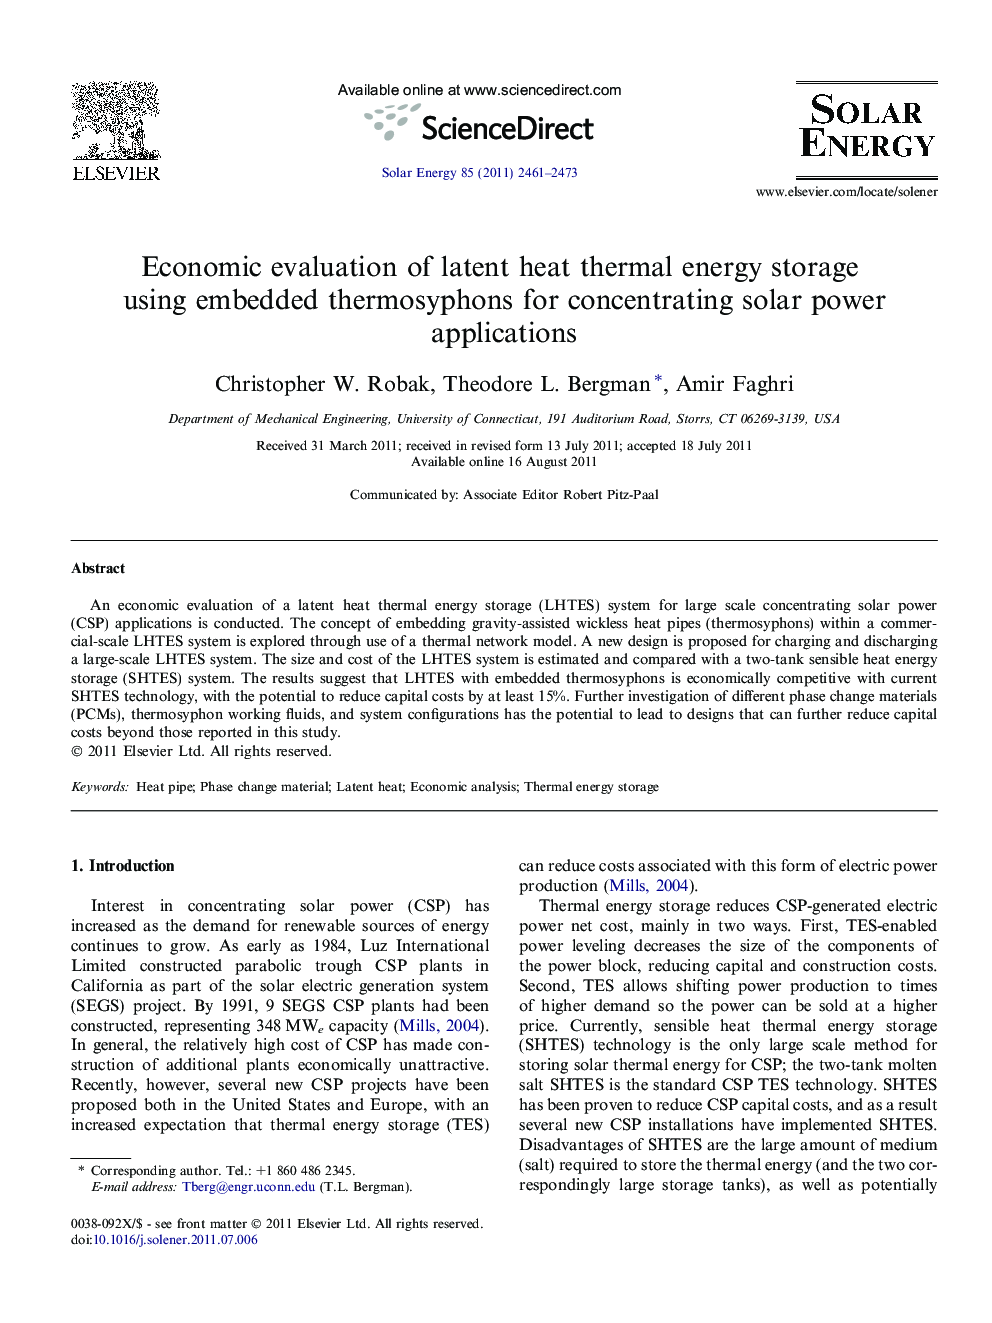 Economic evaluation of latent heat thermal energy storage using embedded thermosyphons for concentrating solar power applications